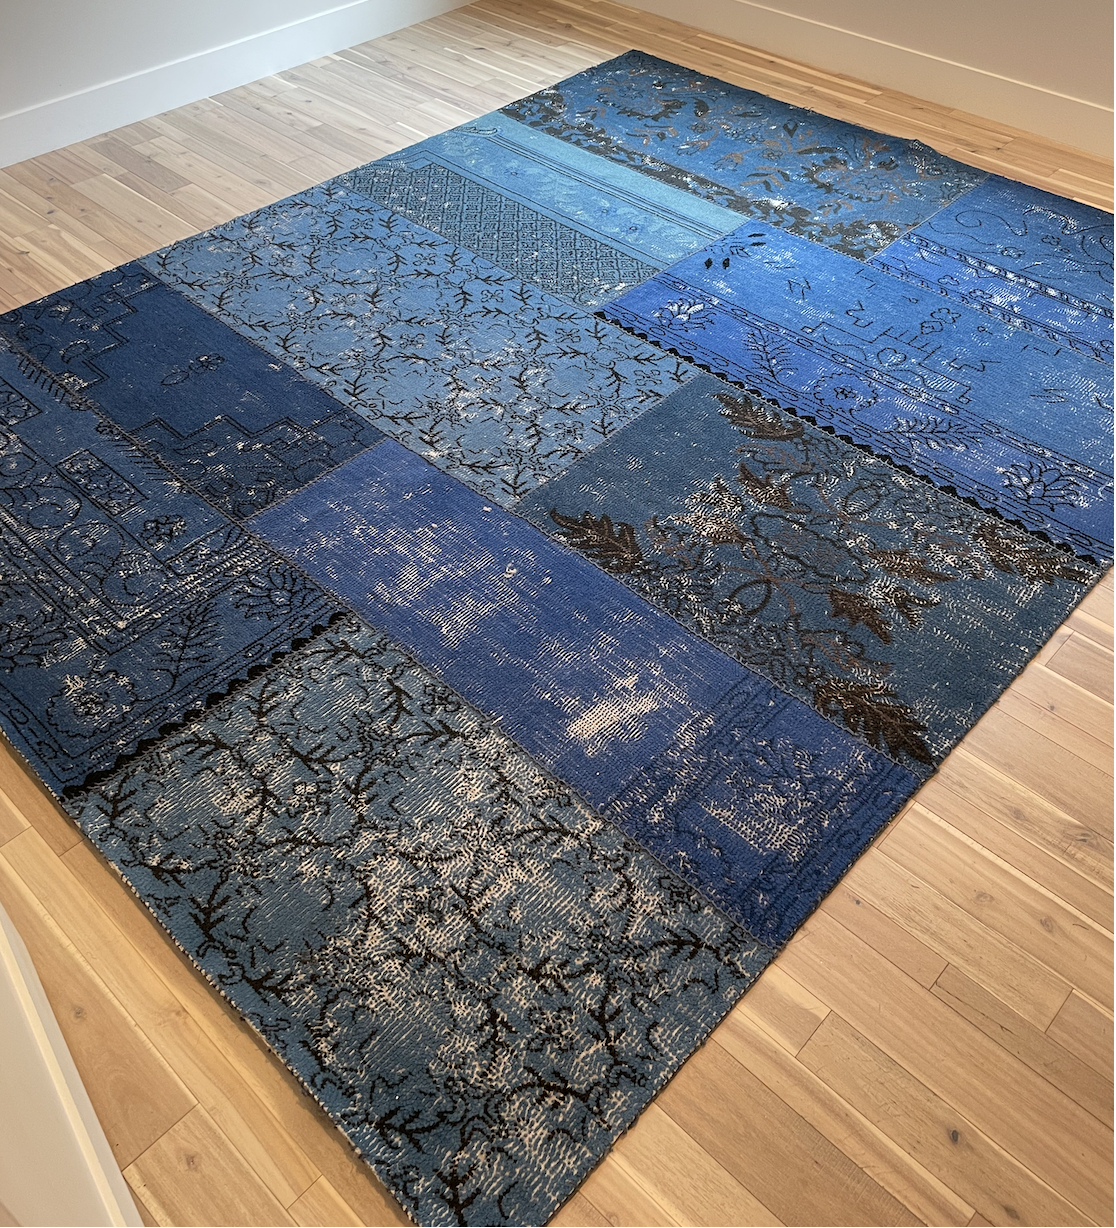 Shades of blue and black, patchwork rug